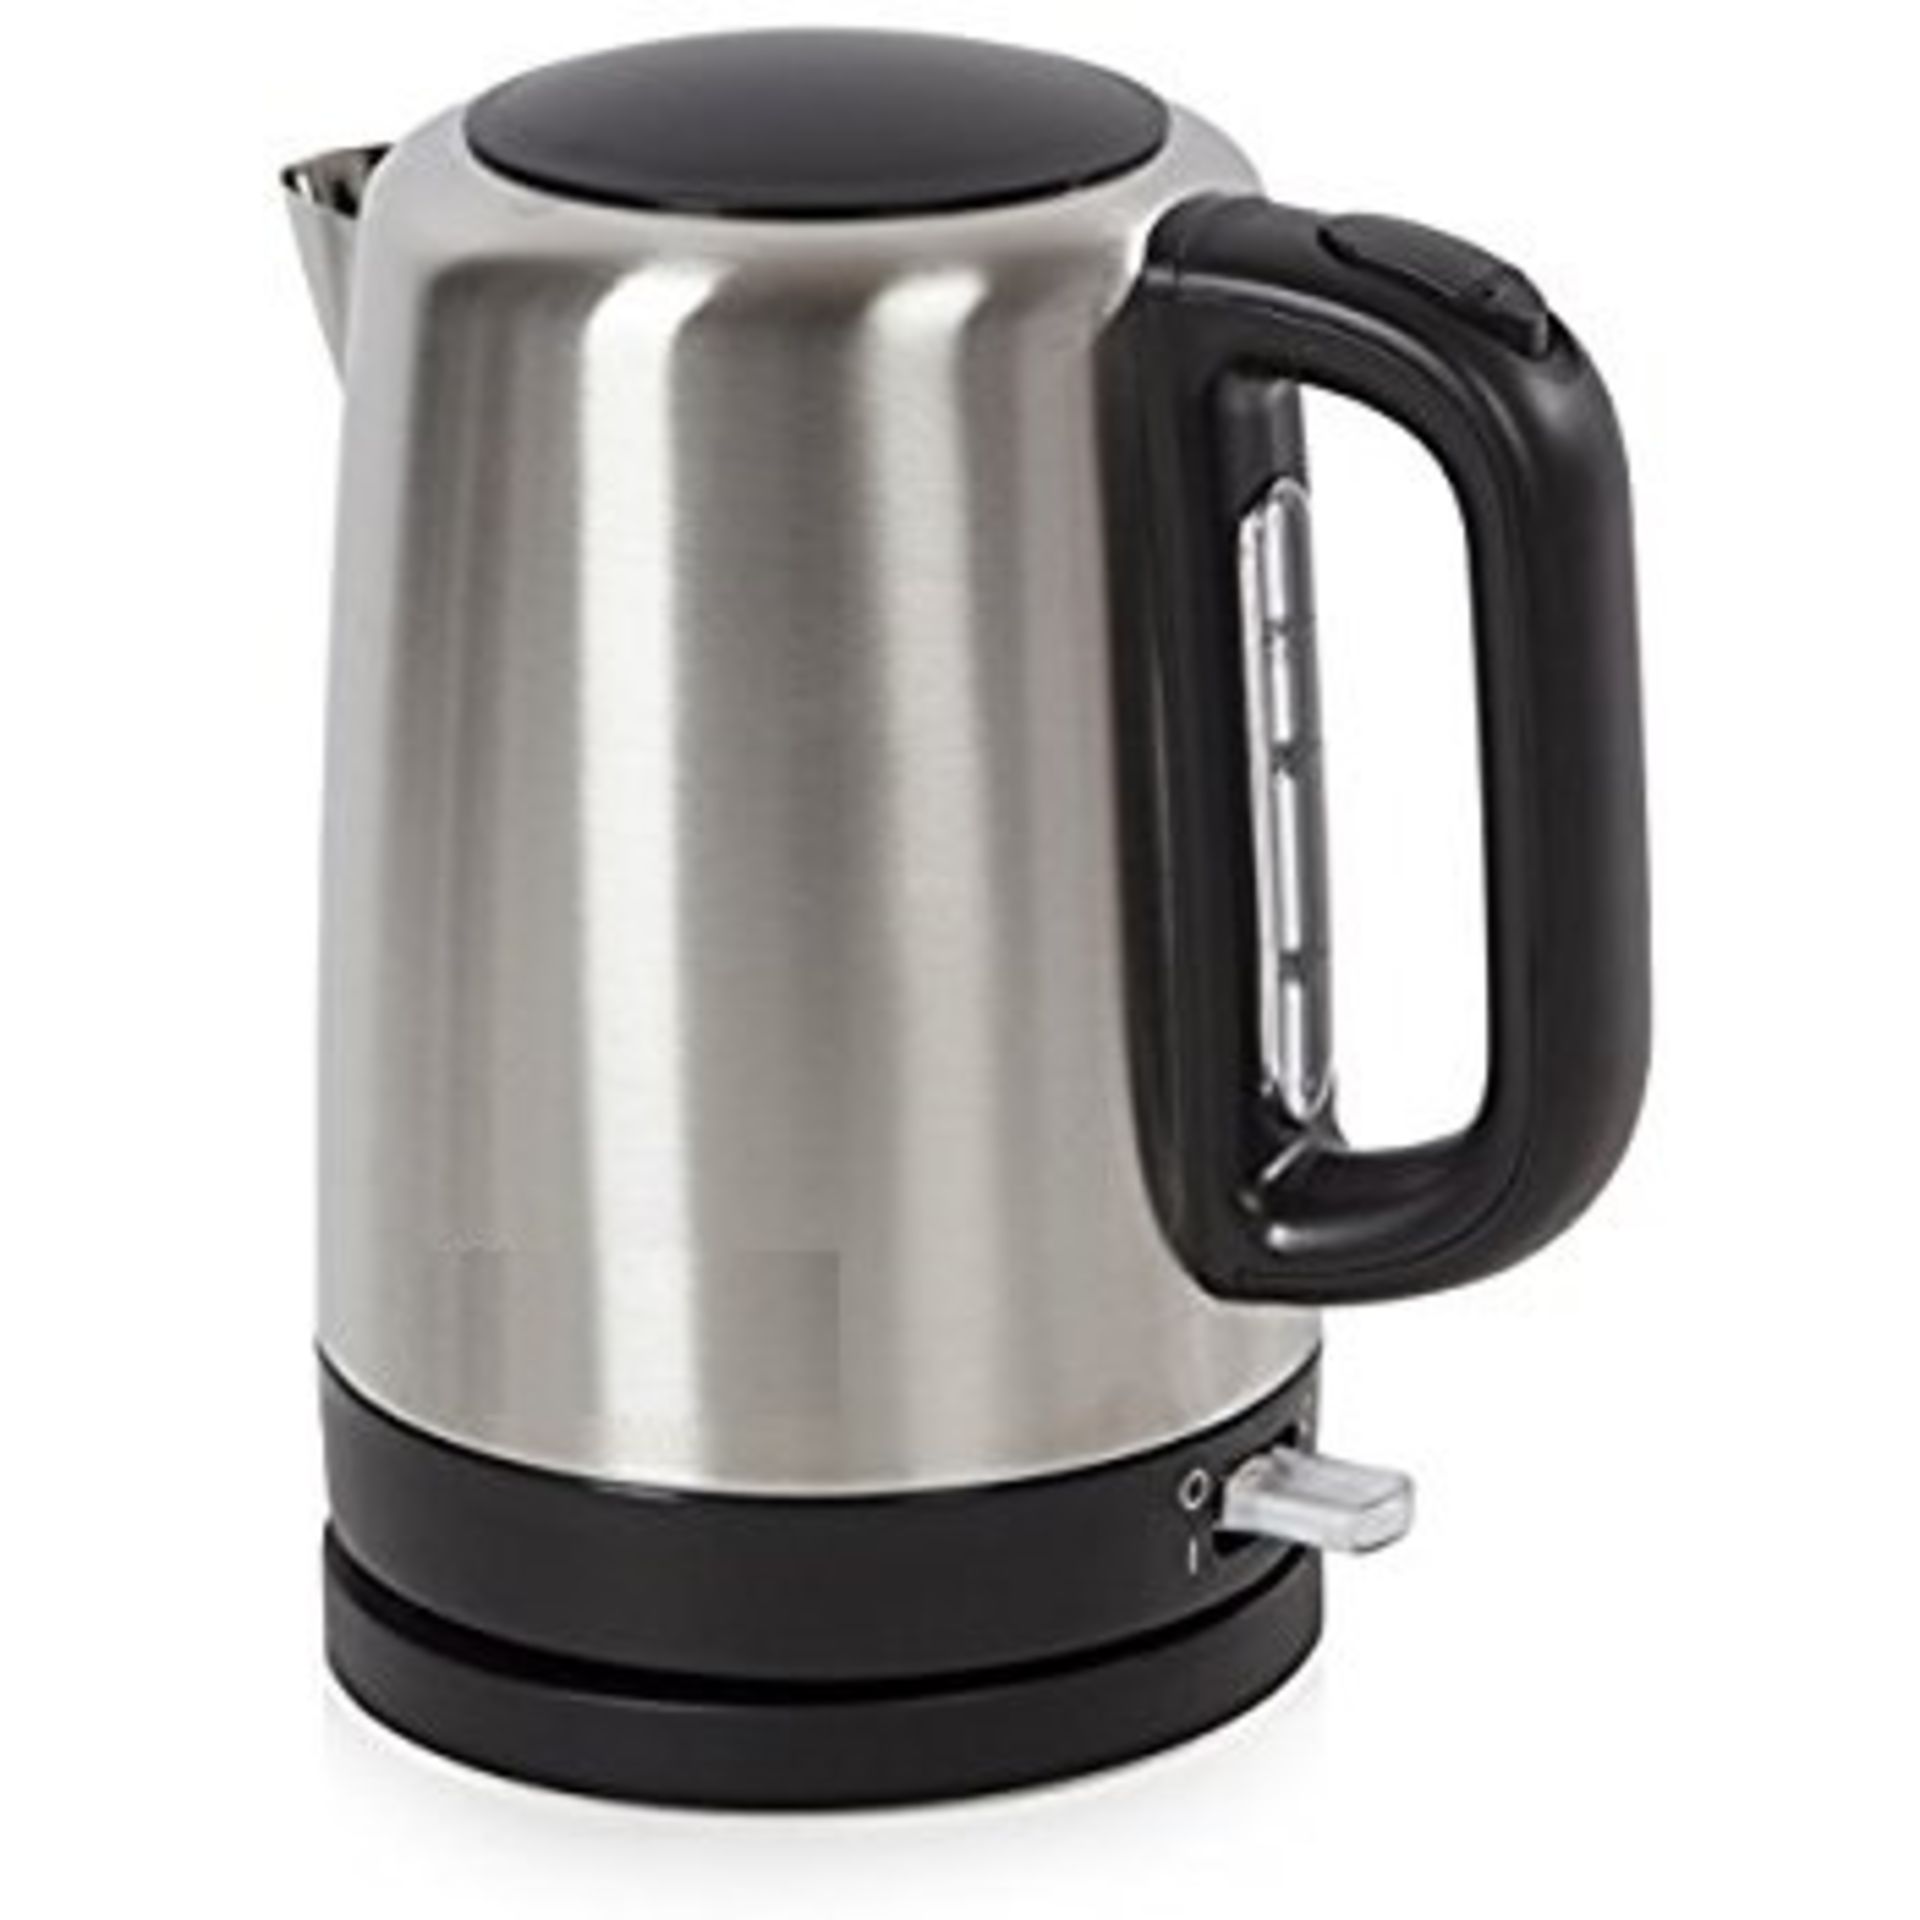 V Brand New Stainless Steel 3100W 1.5 Litre Electronic Kettle with removable limescale filter